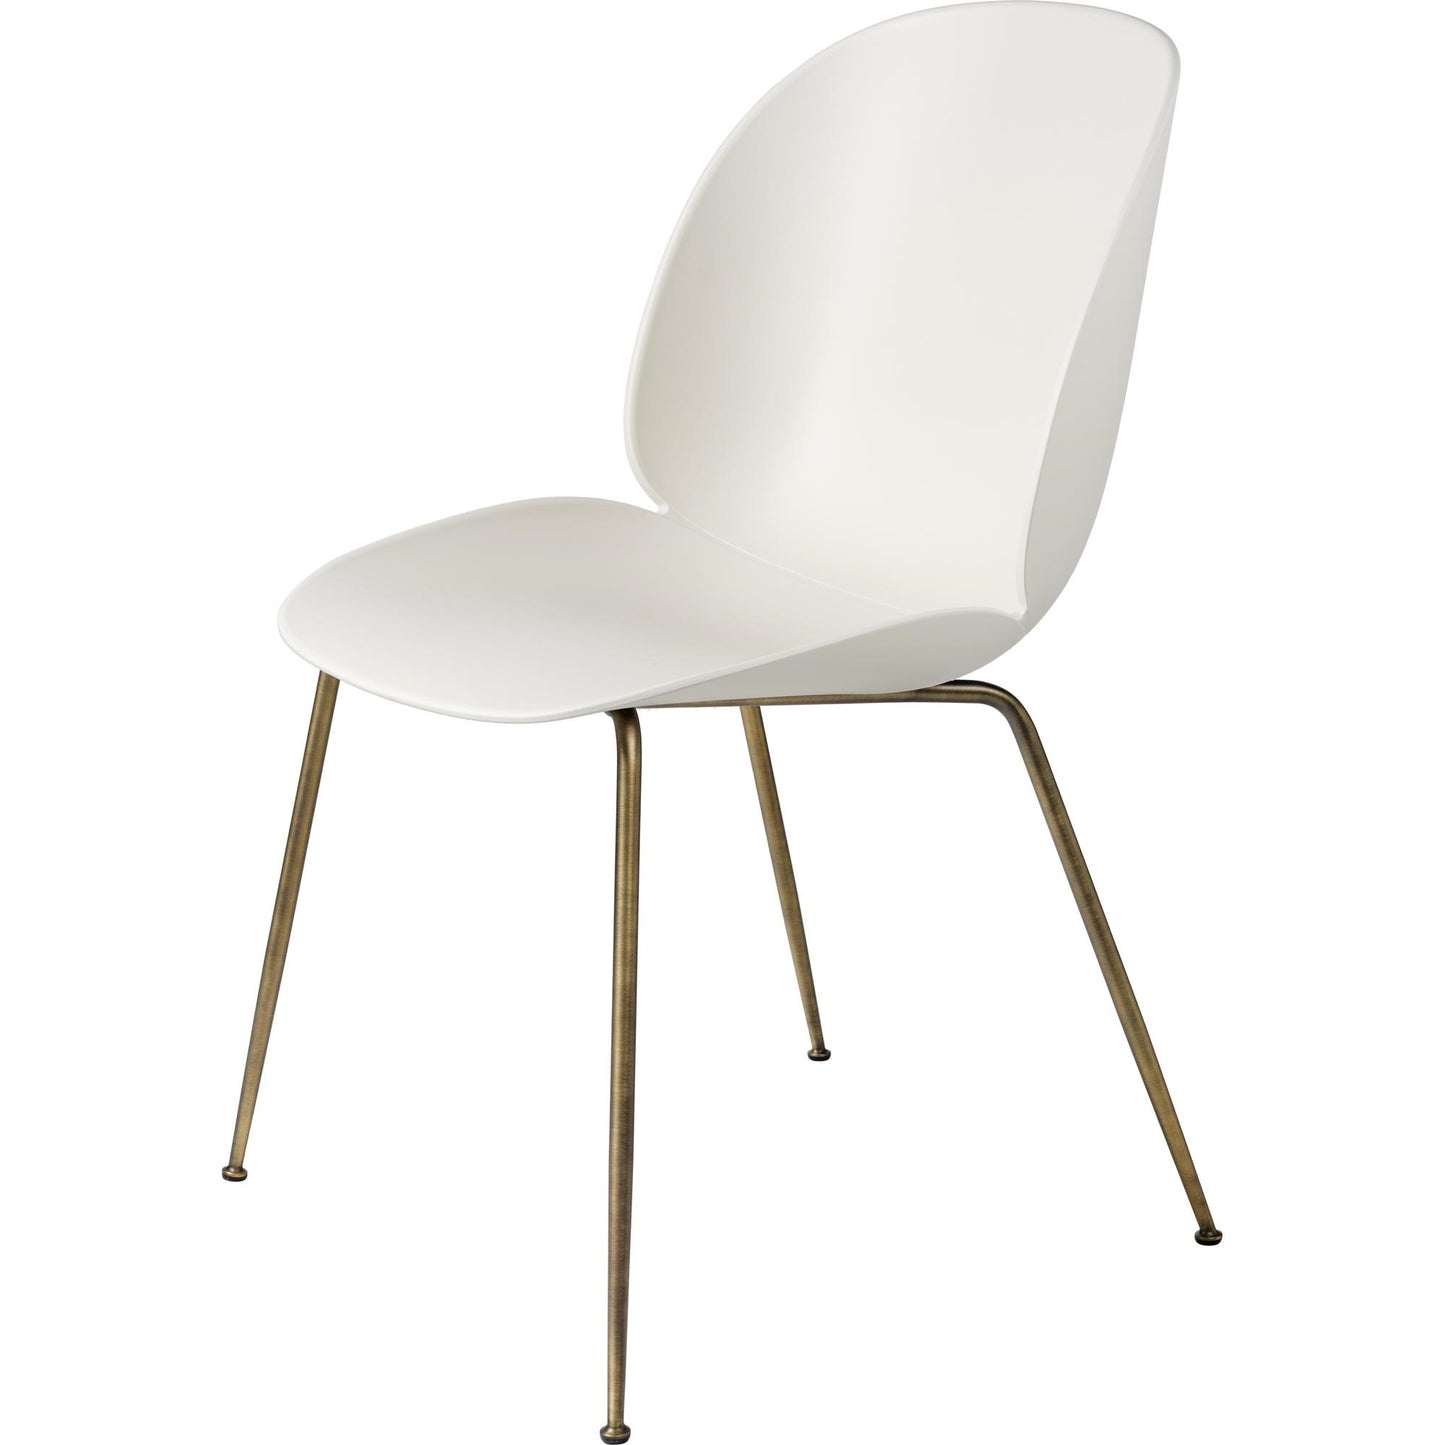 Beetle Dining Chair Conic Base Antique Brass by GUBI #Antique Brass/ Alabaster White